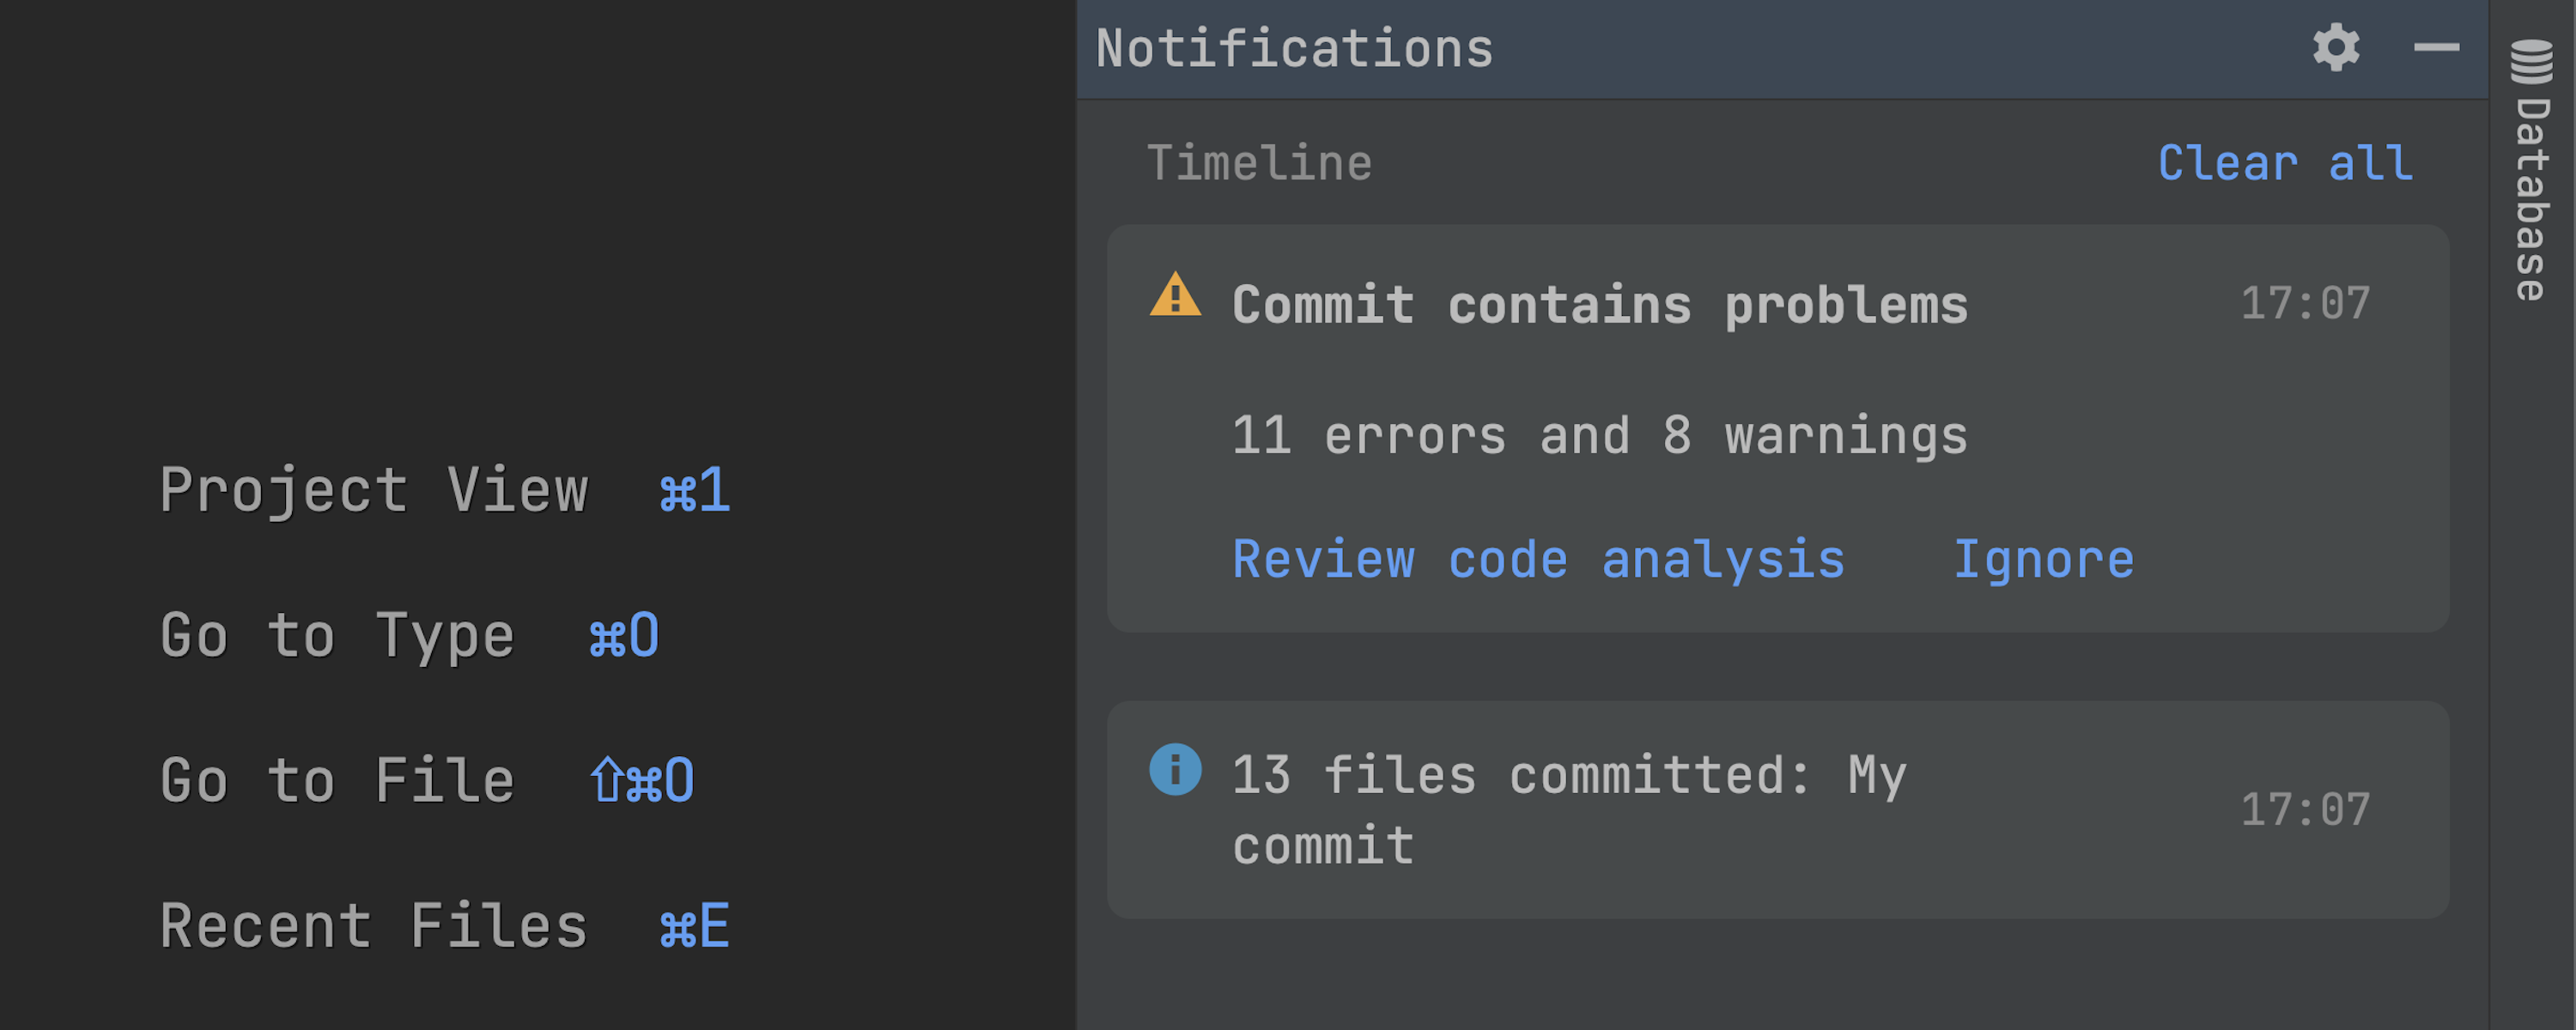 The Notifications window shows the result of a pre-commit check